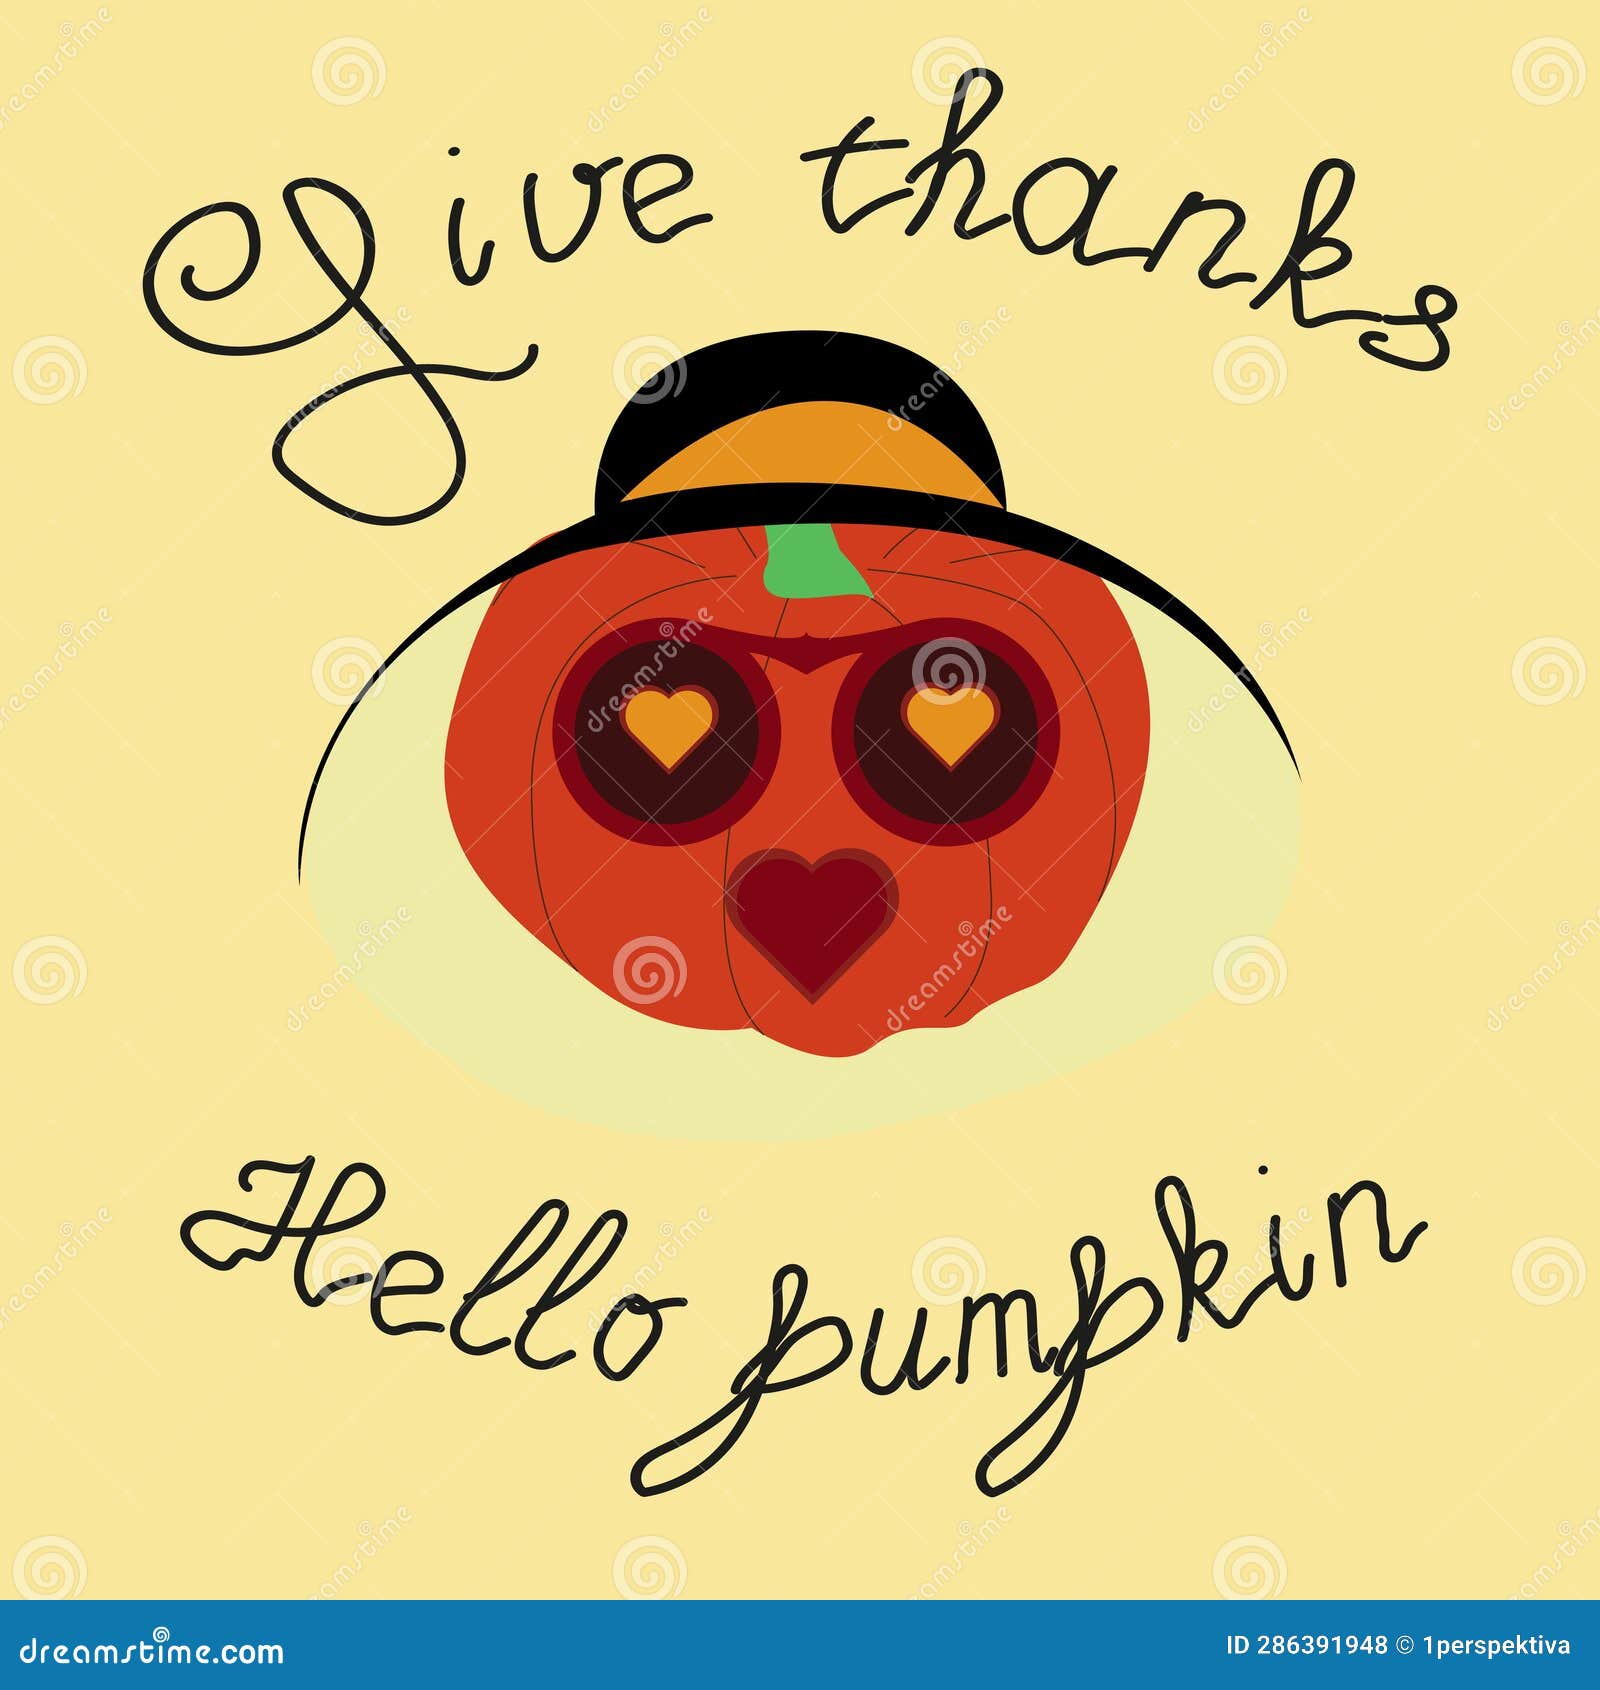 thanksgiving lettering - give thanks - hello pumpkin - hand-drawn lettering. thanksgiving  - mrs pumpkin character in